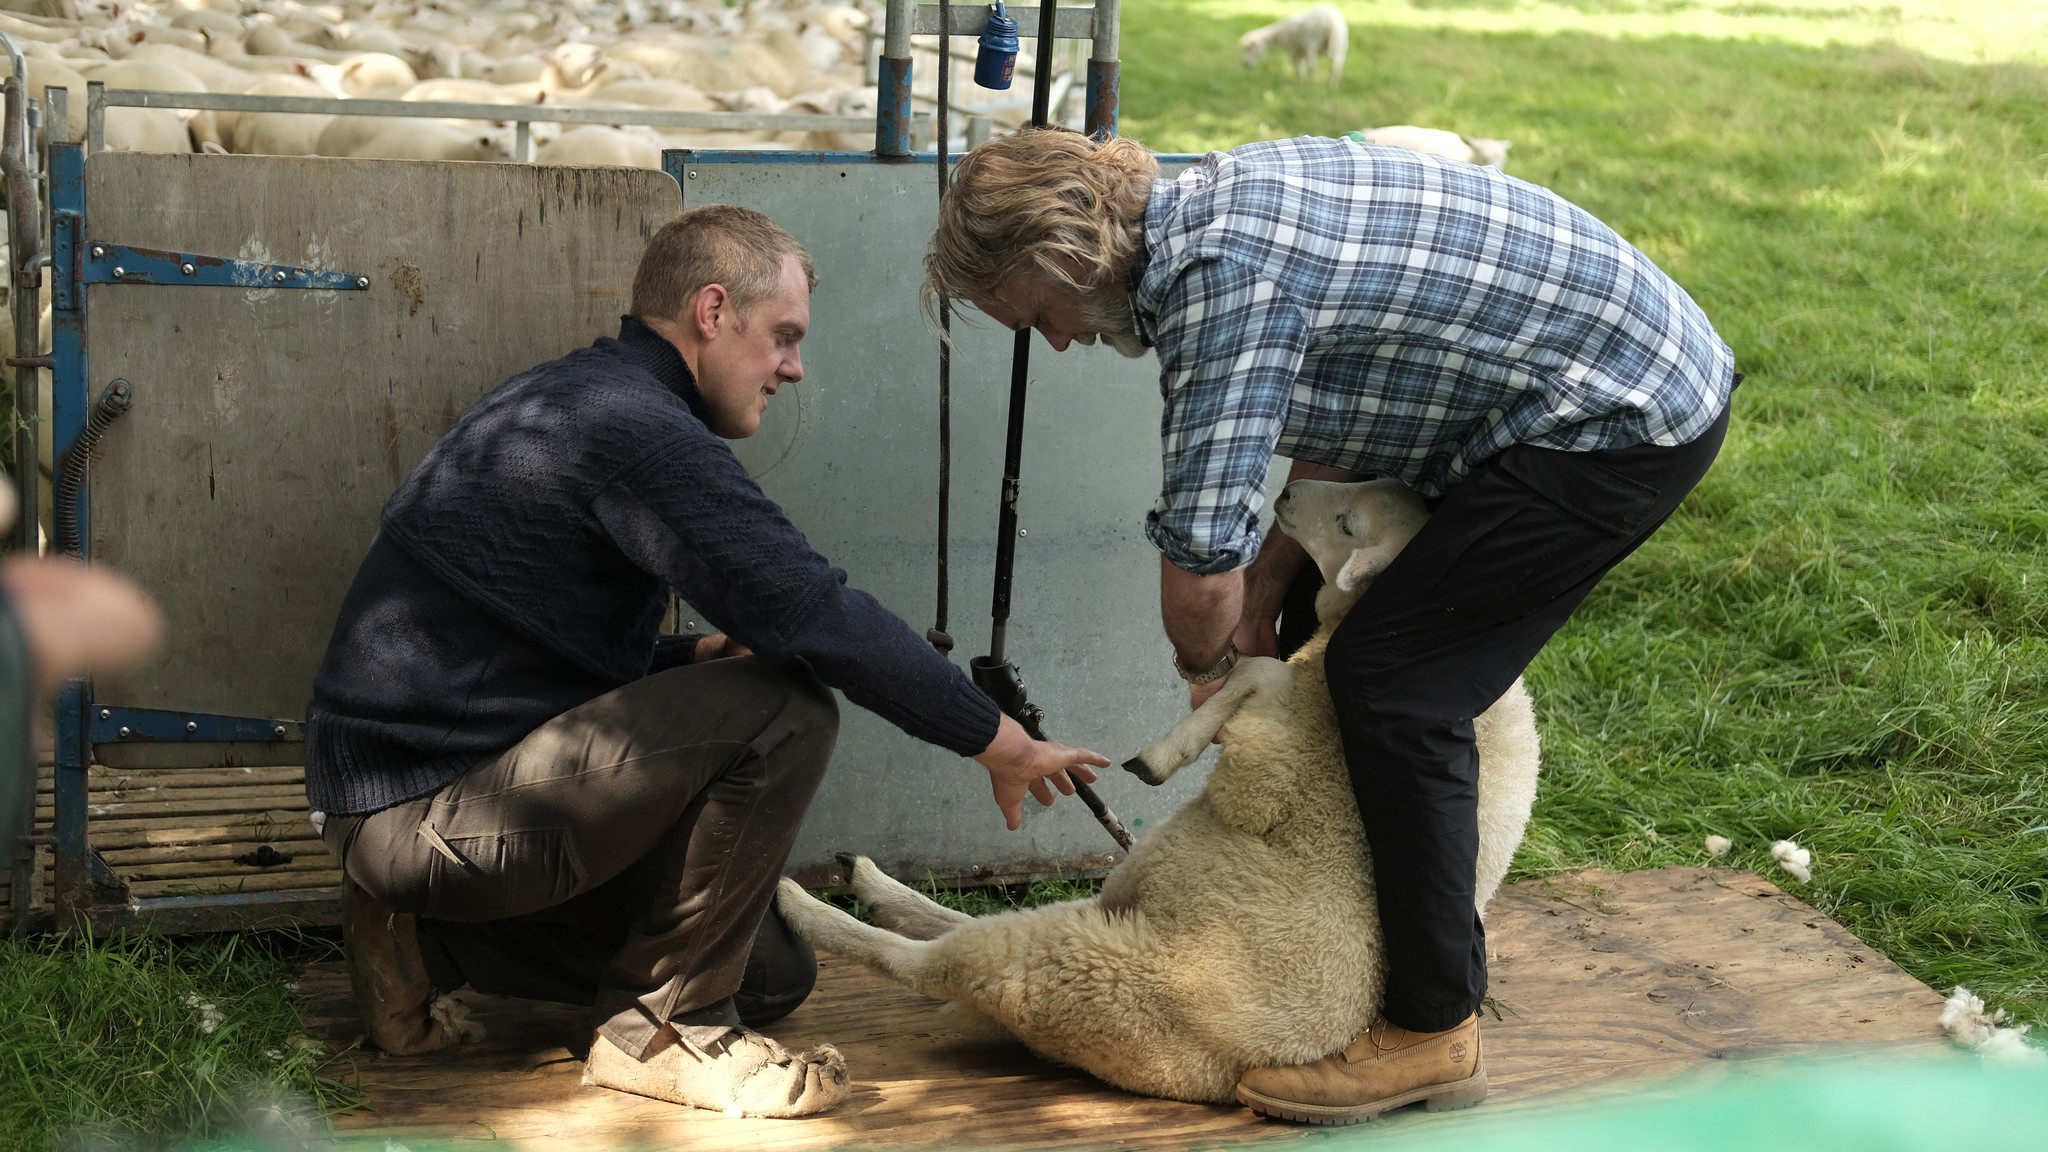 Marcus Wareing shears a sheep with help of expert on Tales of a Kitchen Garden